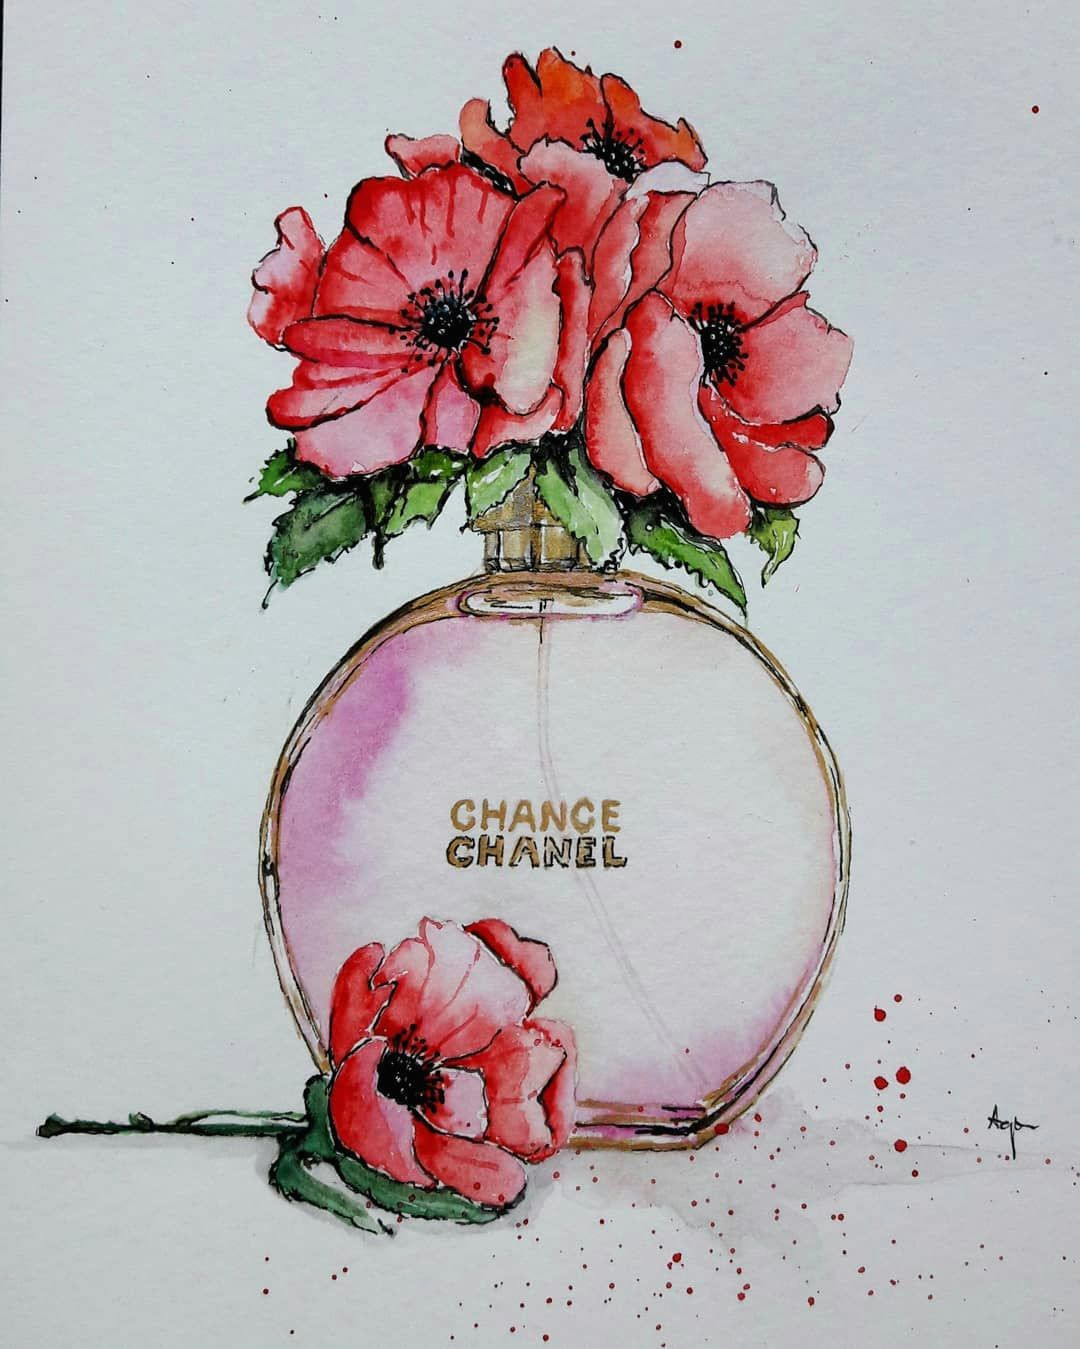 poppywatercolor flowers chance fragrance smells drawing gift aga krol plymouth devon instaart artwork inspiration gallery colorfull elegant fasionstyle